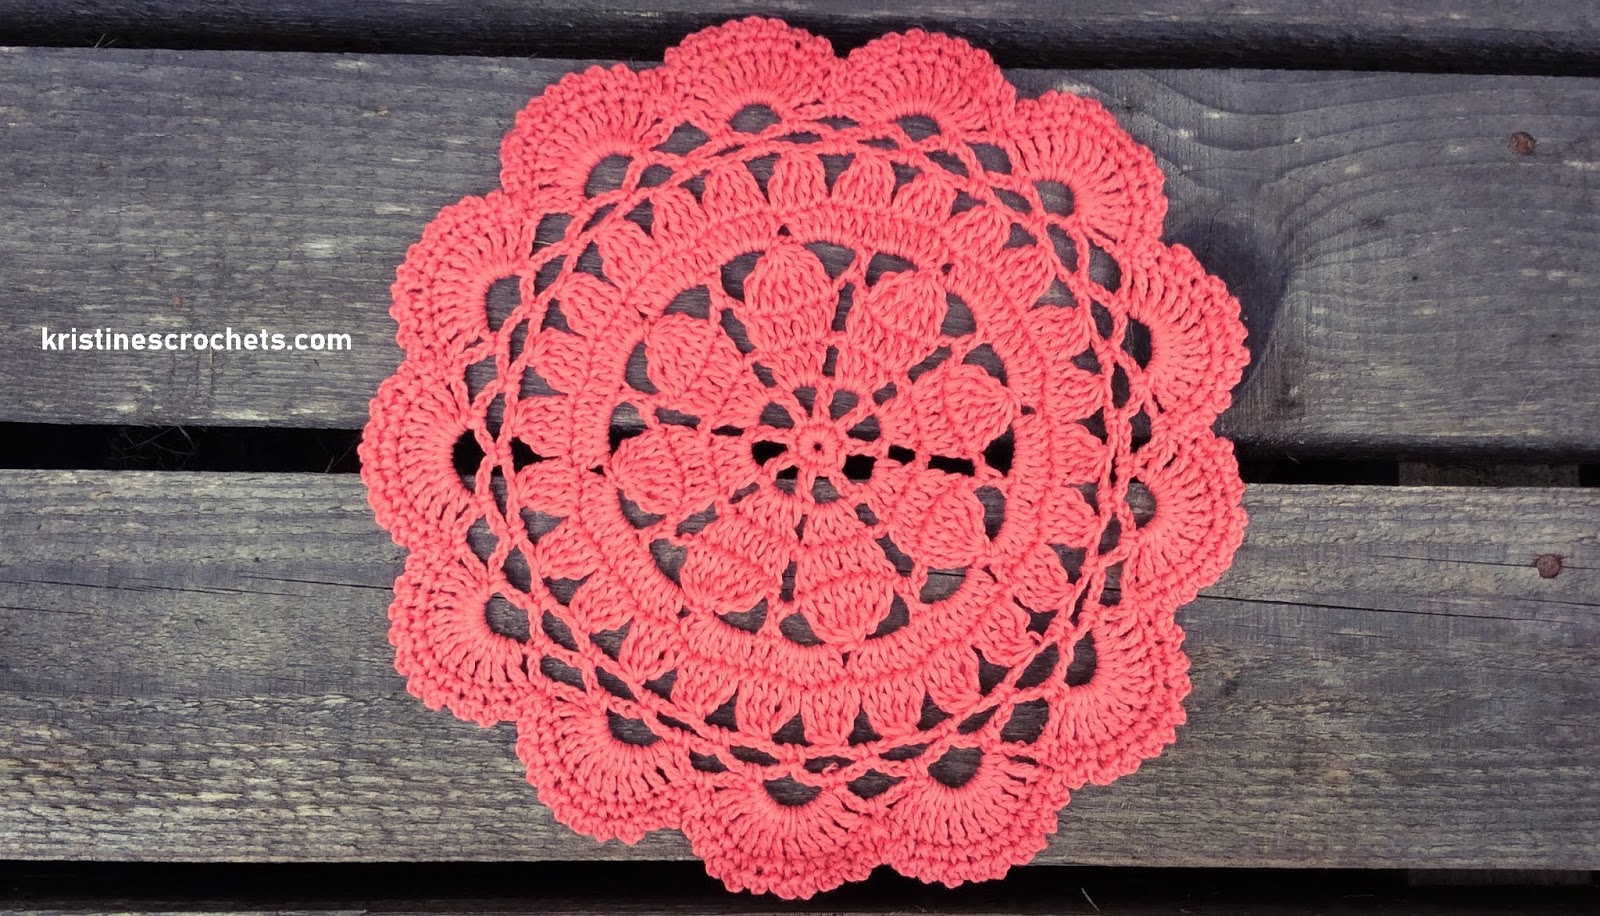 24 Free Crochet Doily Patterns for Beginners